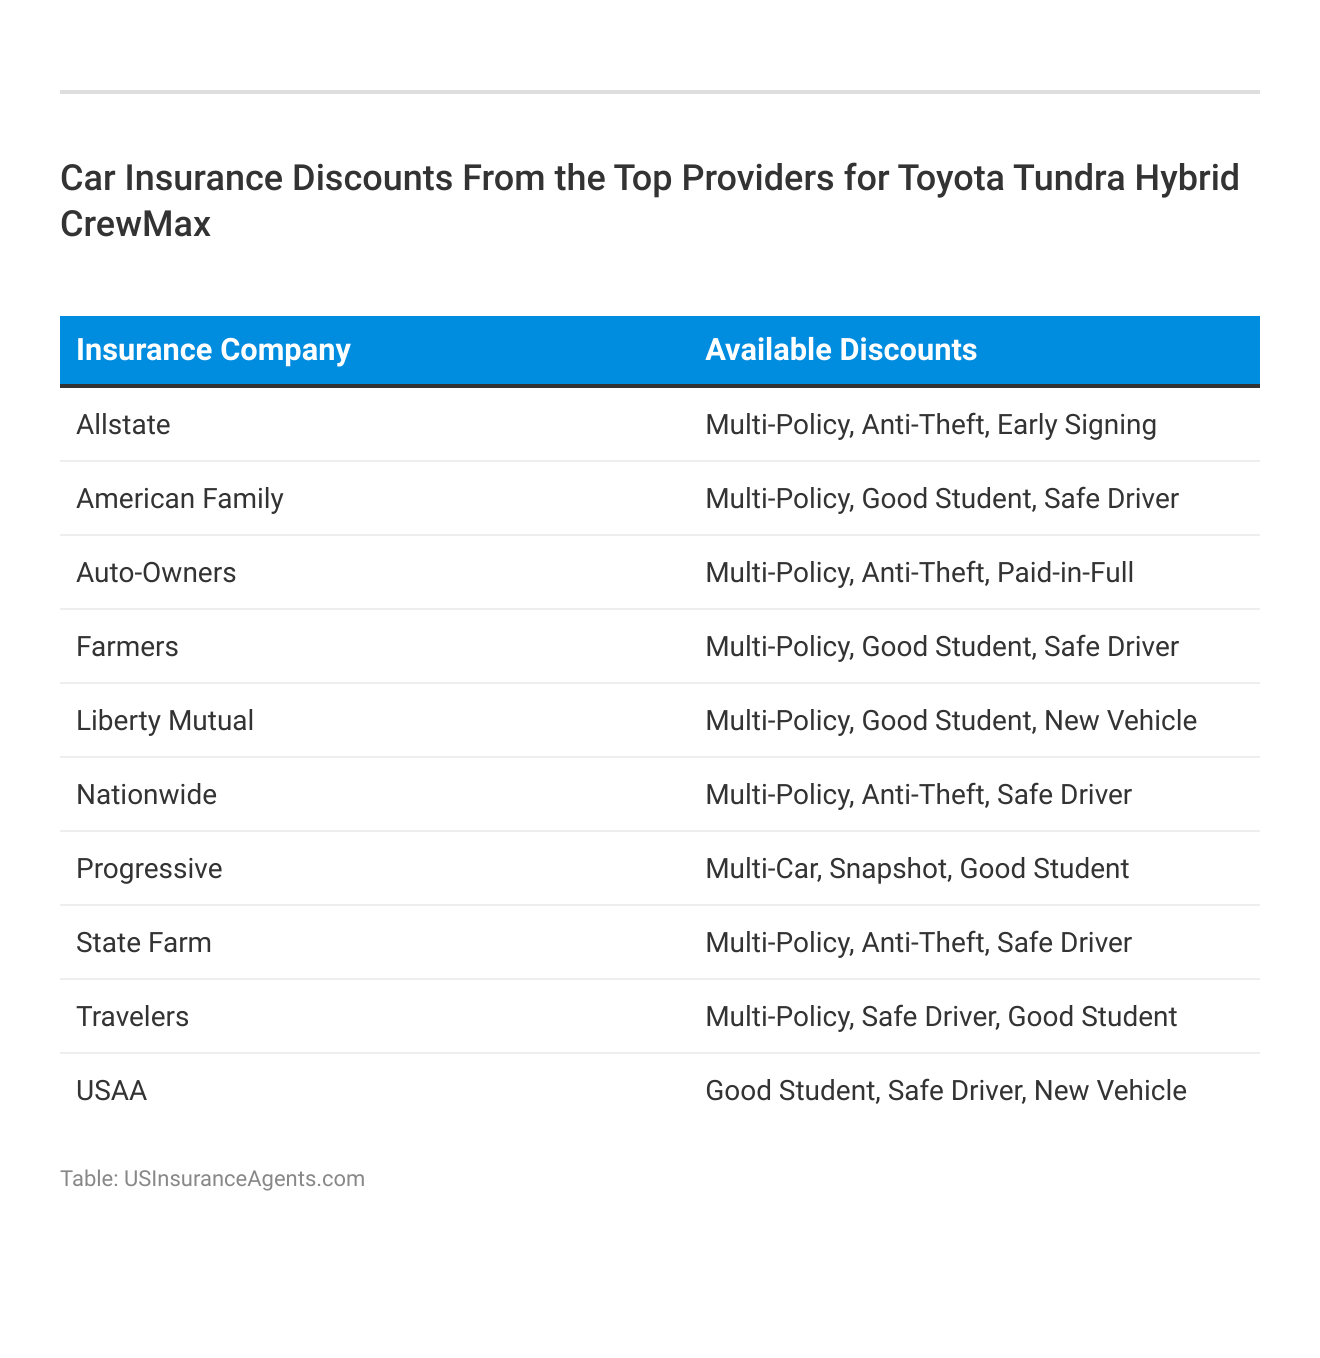 <h3>Car Insurance Discounts From the Top Providers for Toyota Tundra Hybrid CrewMax</h3>